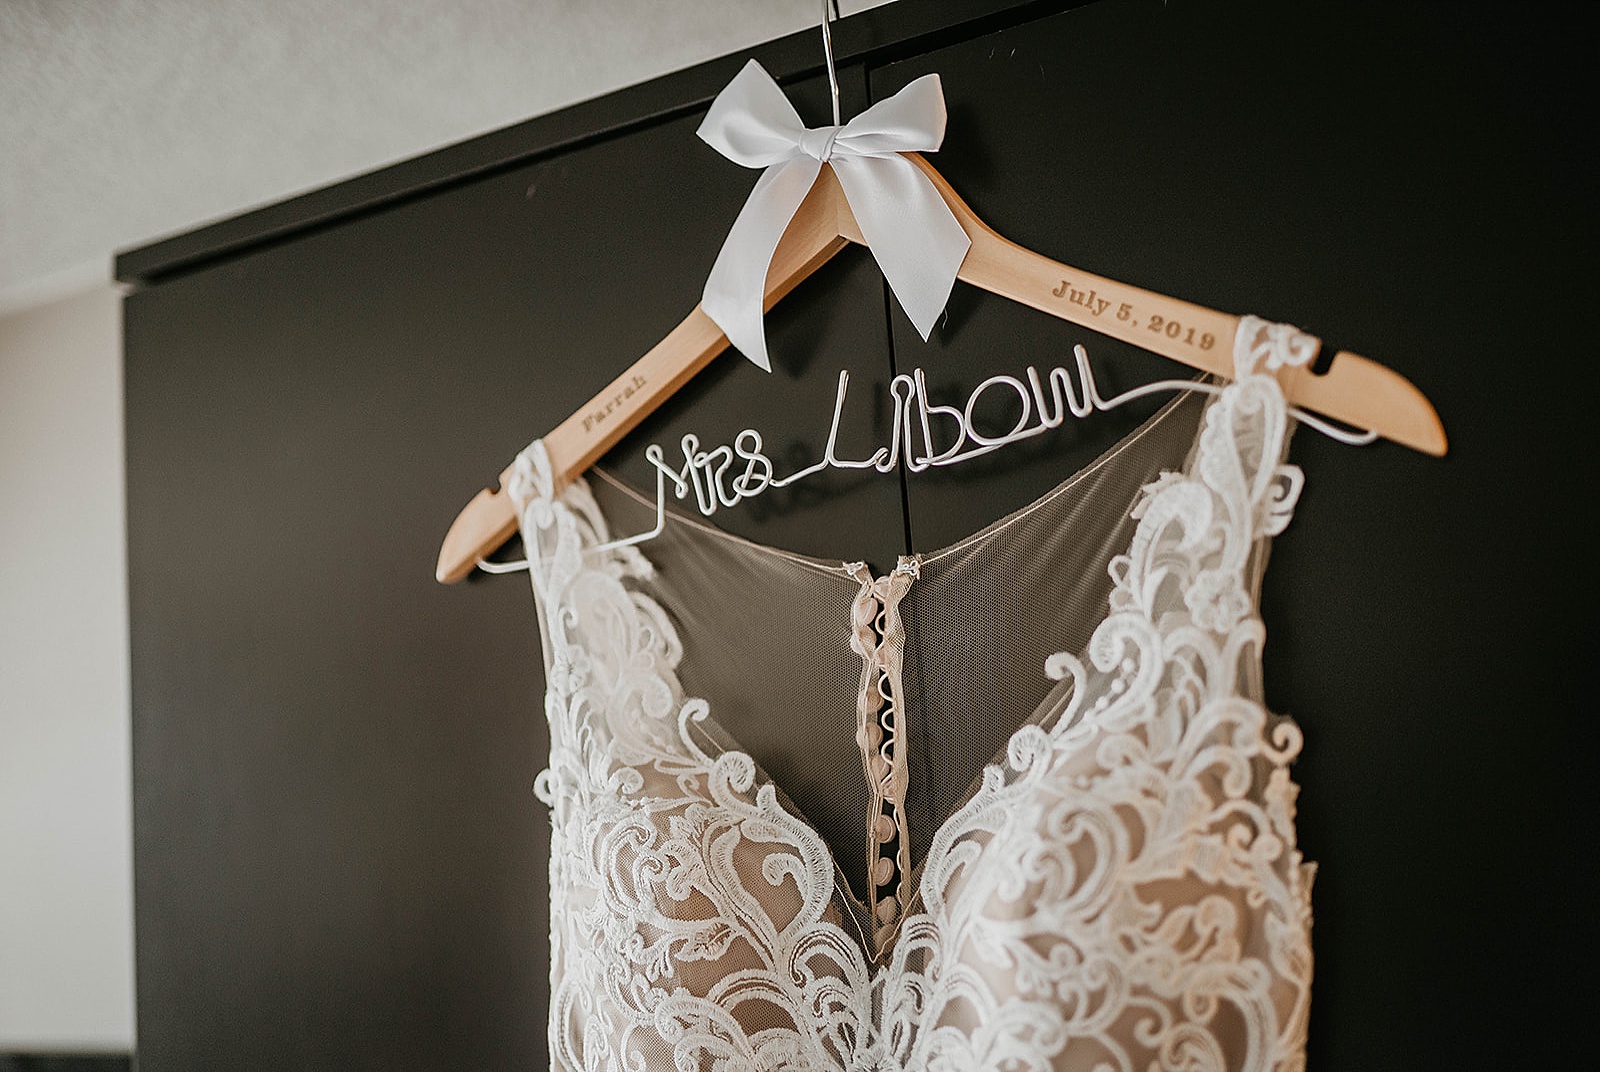 Doubletree by Hilton in Deerfield Wedding captured by South Florida Wedding Photographer, Krystal Capone Photography